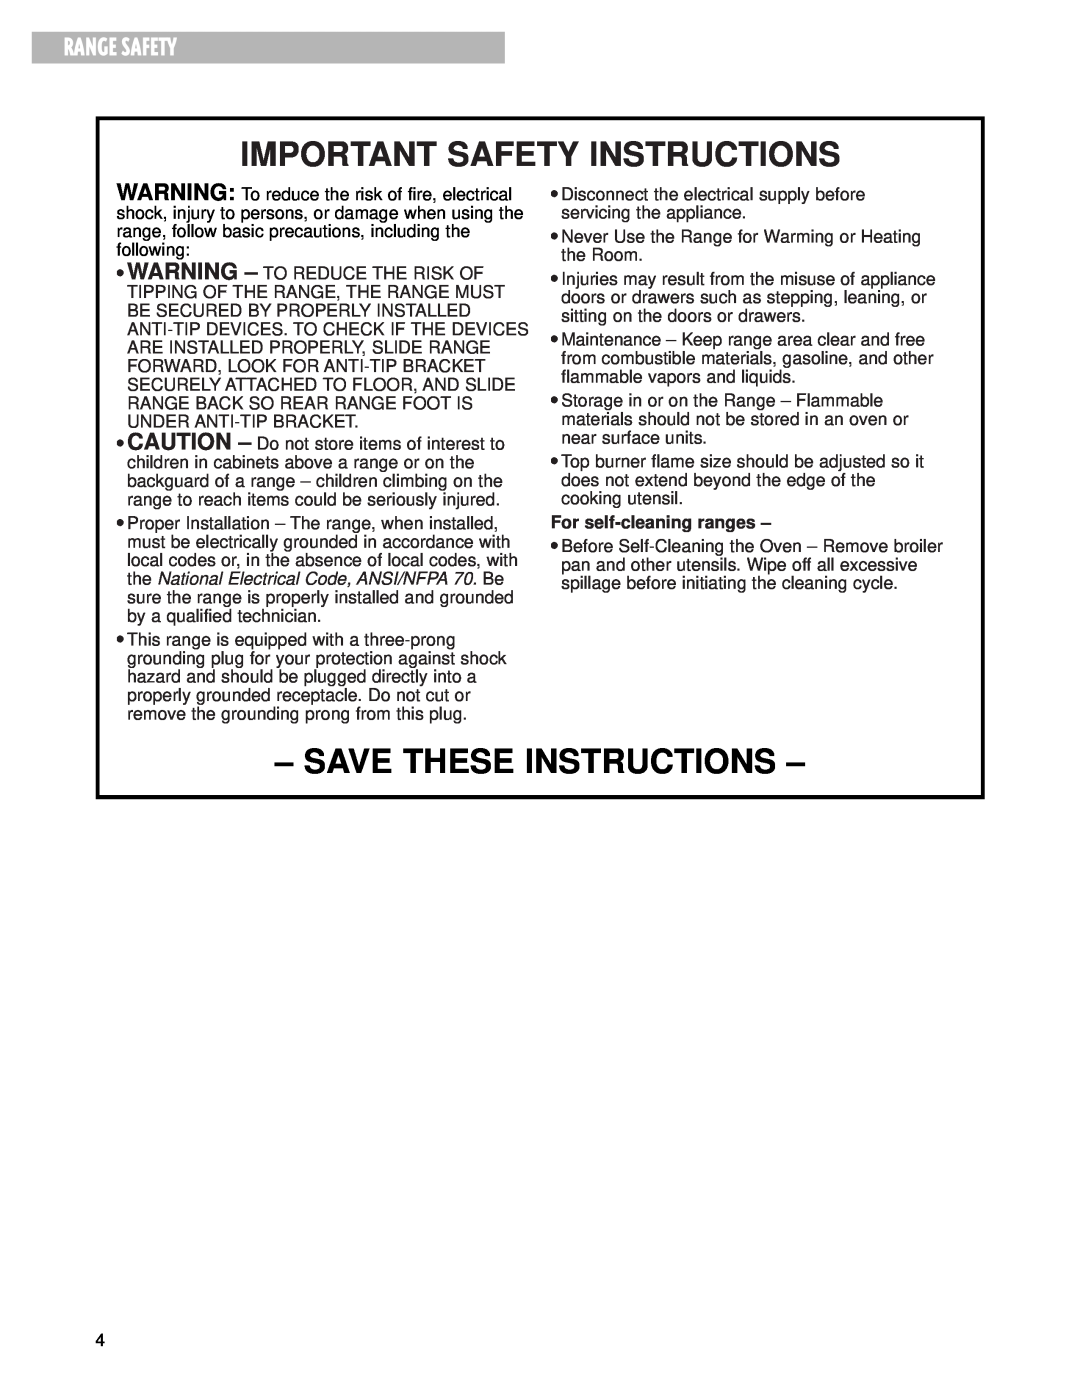 Whirlpool CGS365H warranty Range Safety, Important Safety Instructions, Save These Instructions, For self-cleaning ranges 